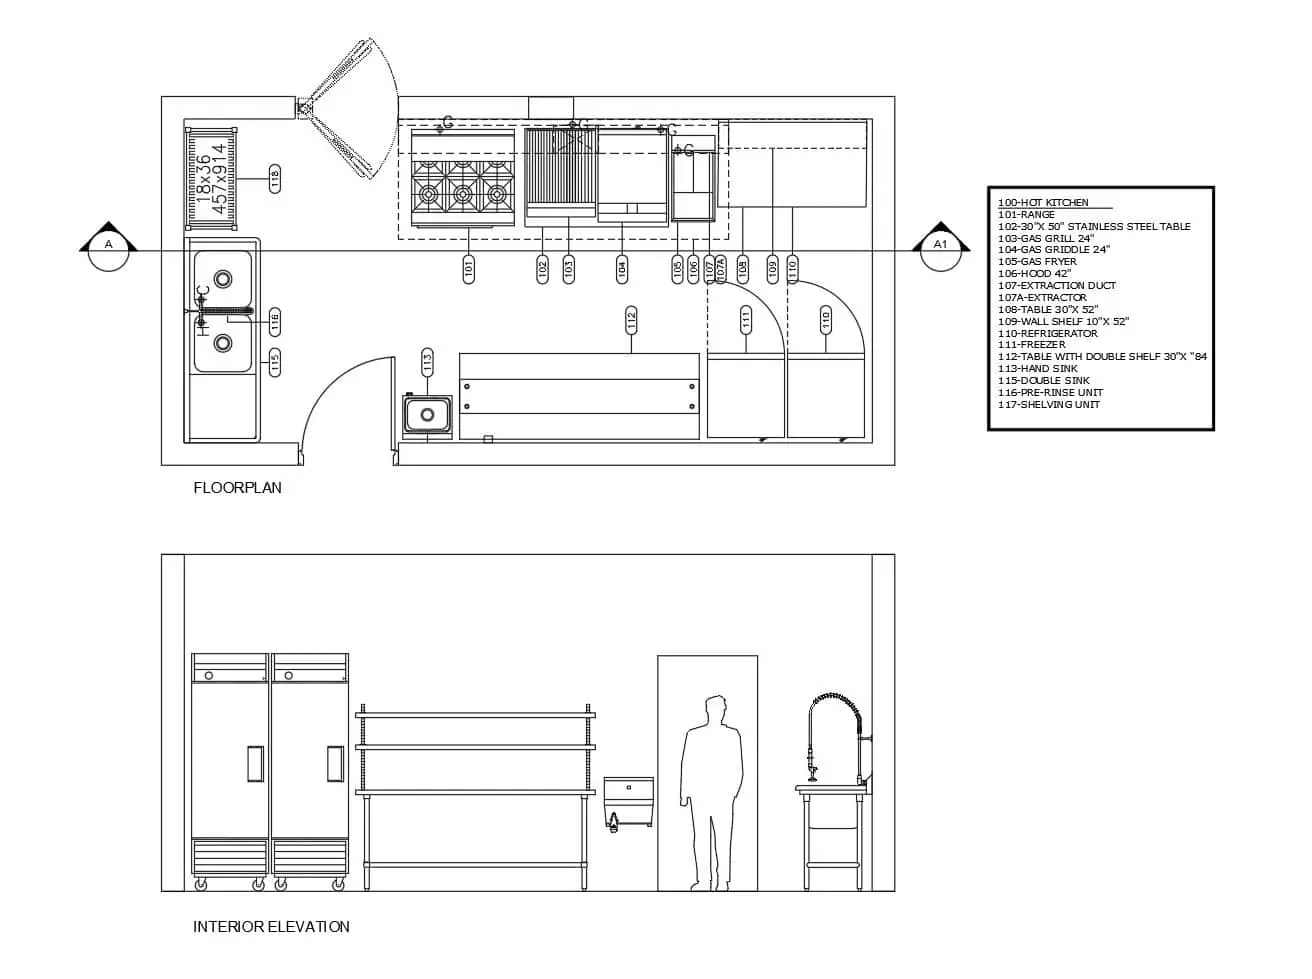 small commercial kitchen architectural plant, catering, detailed plant with details of commercial kitchen furniture